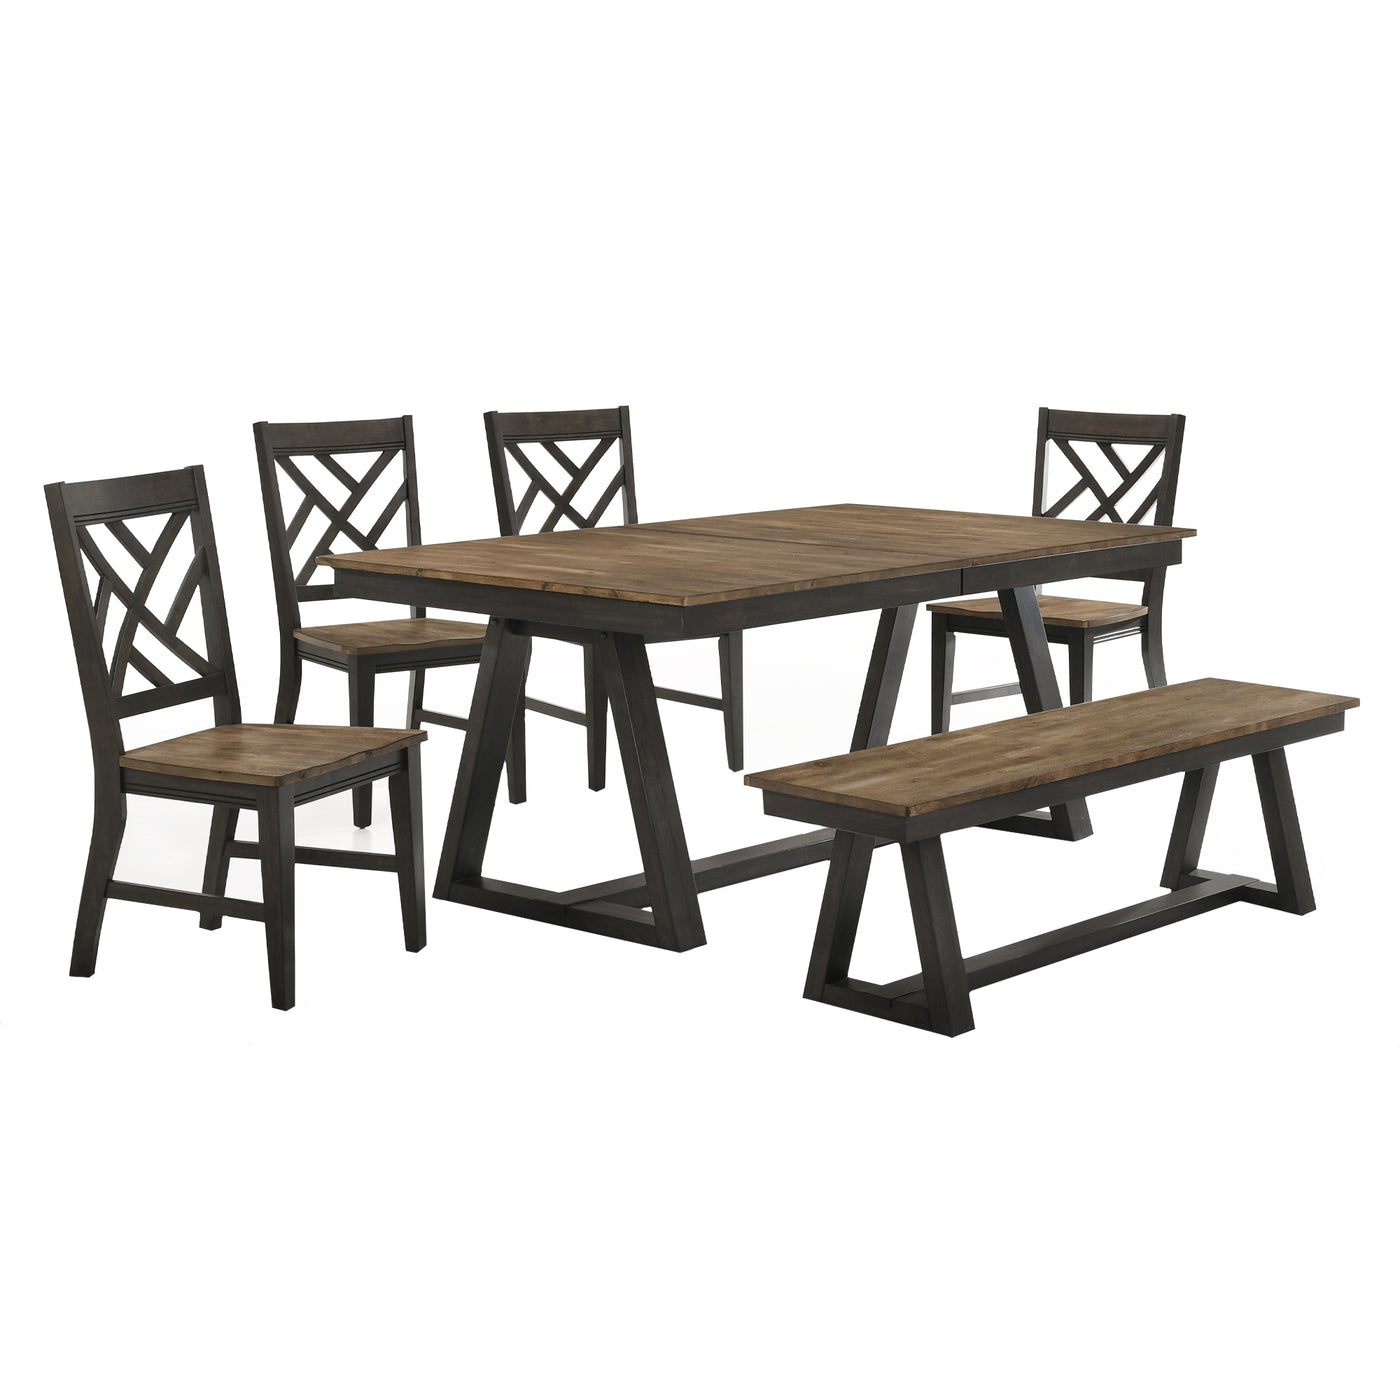 Addie 6-Piece Dining Set with Lattice-Back Dining Chairs - Brown